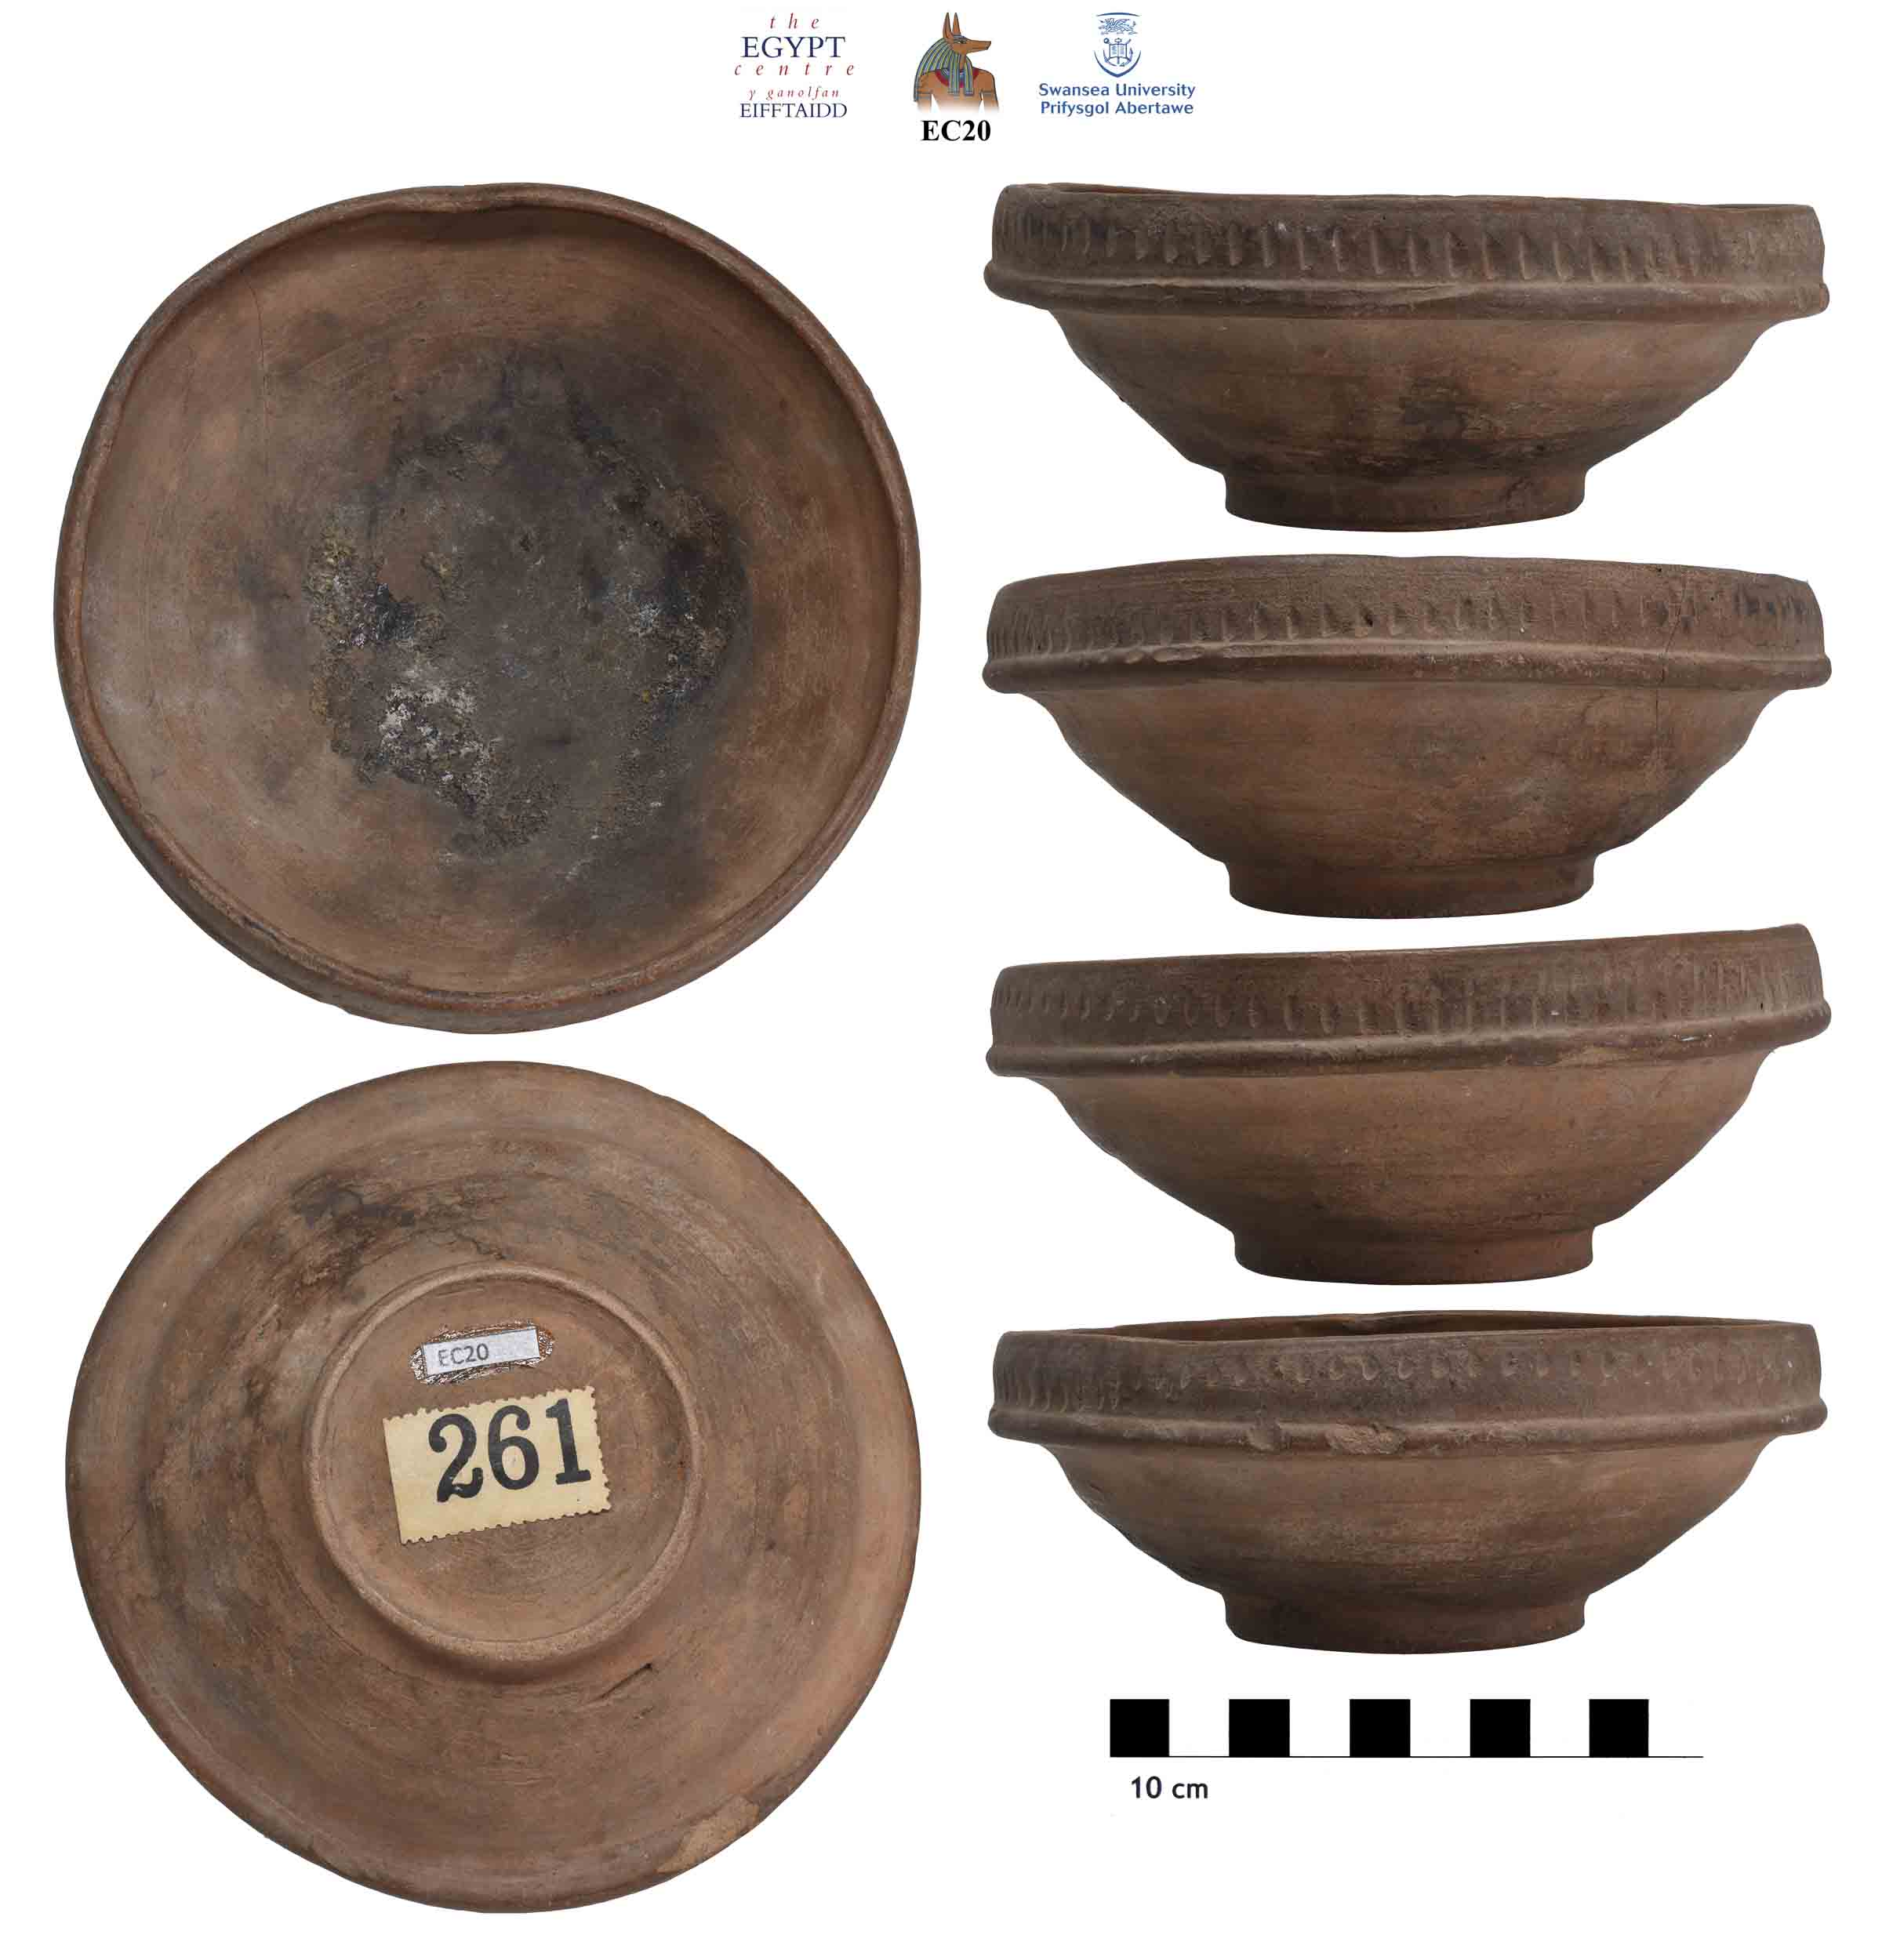 Image for: Small carinated dish